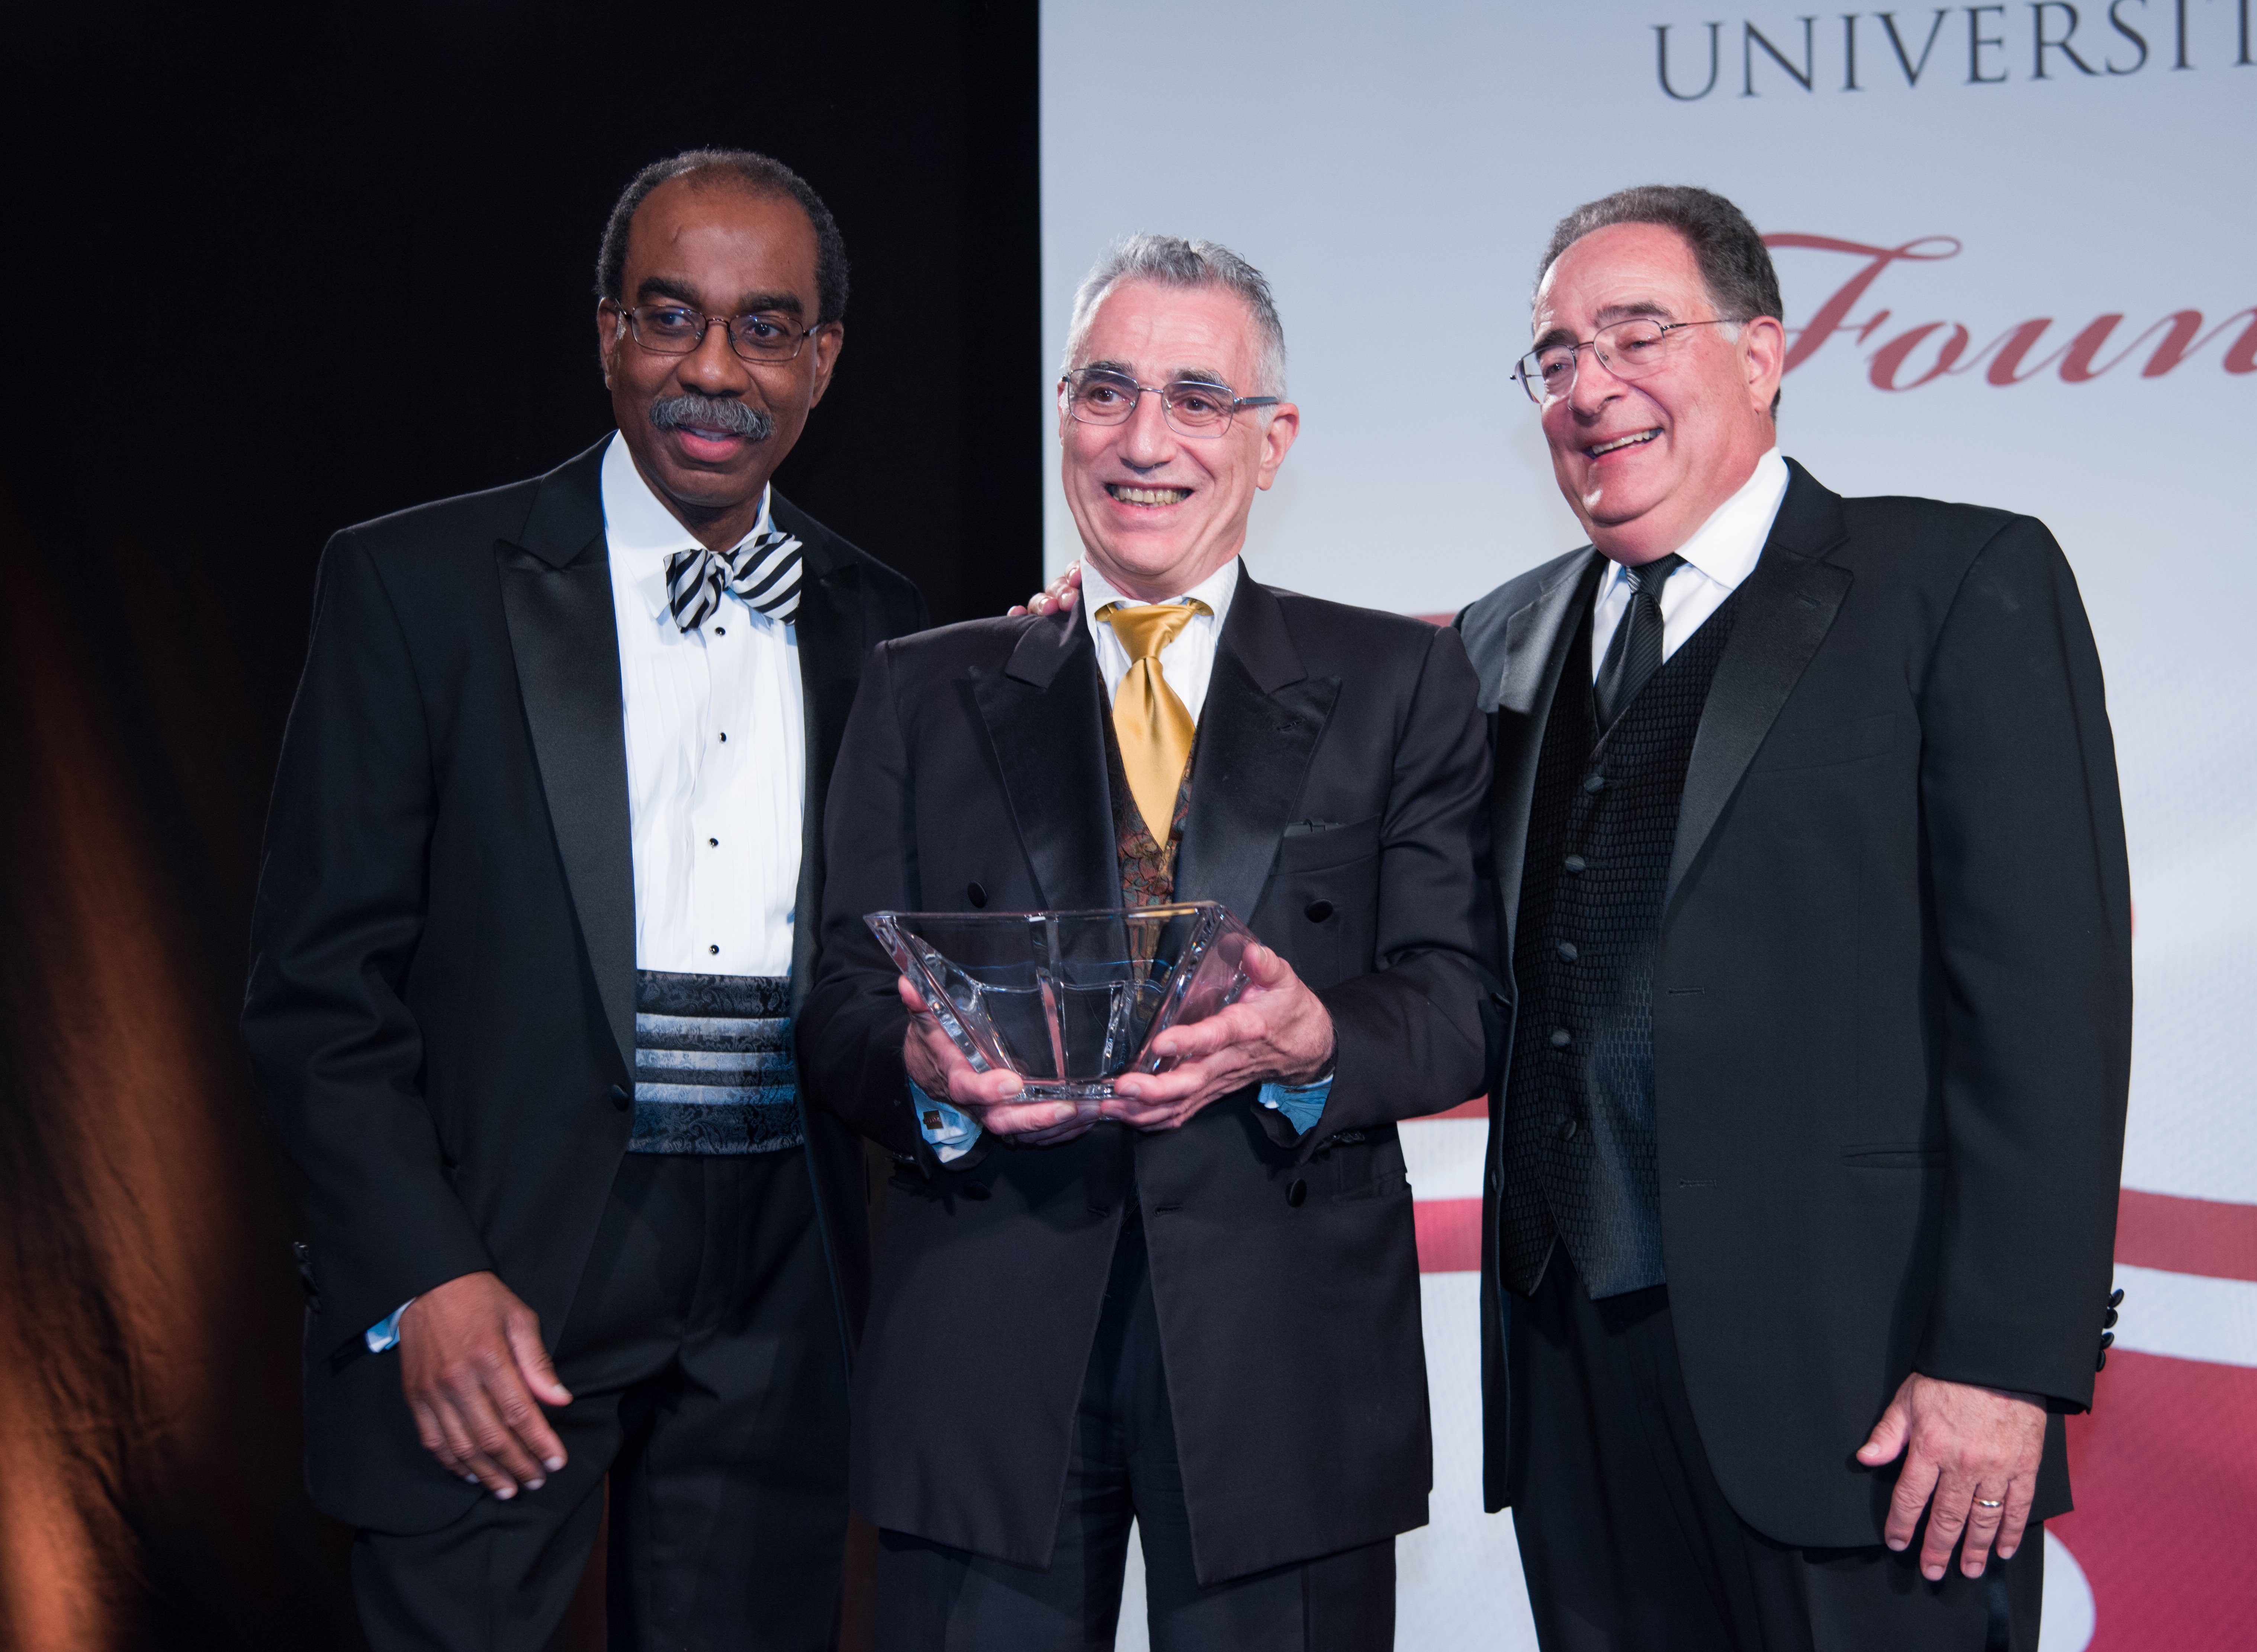 Dr. Thomas Scalea accepts the Entrepreneurs of the Year award on behalf of MARS team members Deborah Stein and Steven Hanish, flanked by School of Medicine Dean E. Albert Reece and UMB President Jay A. Perman.